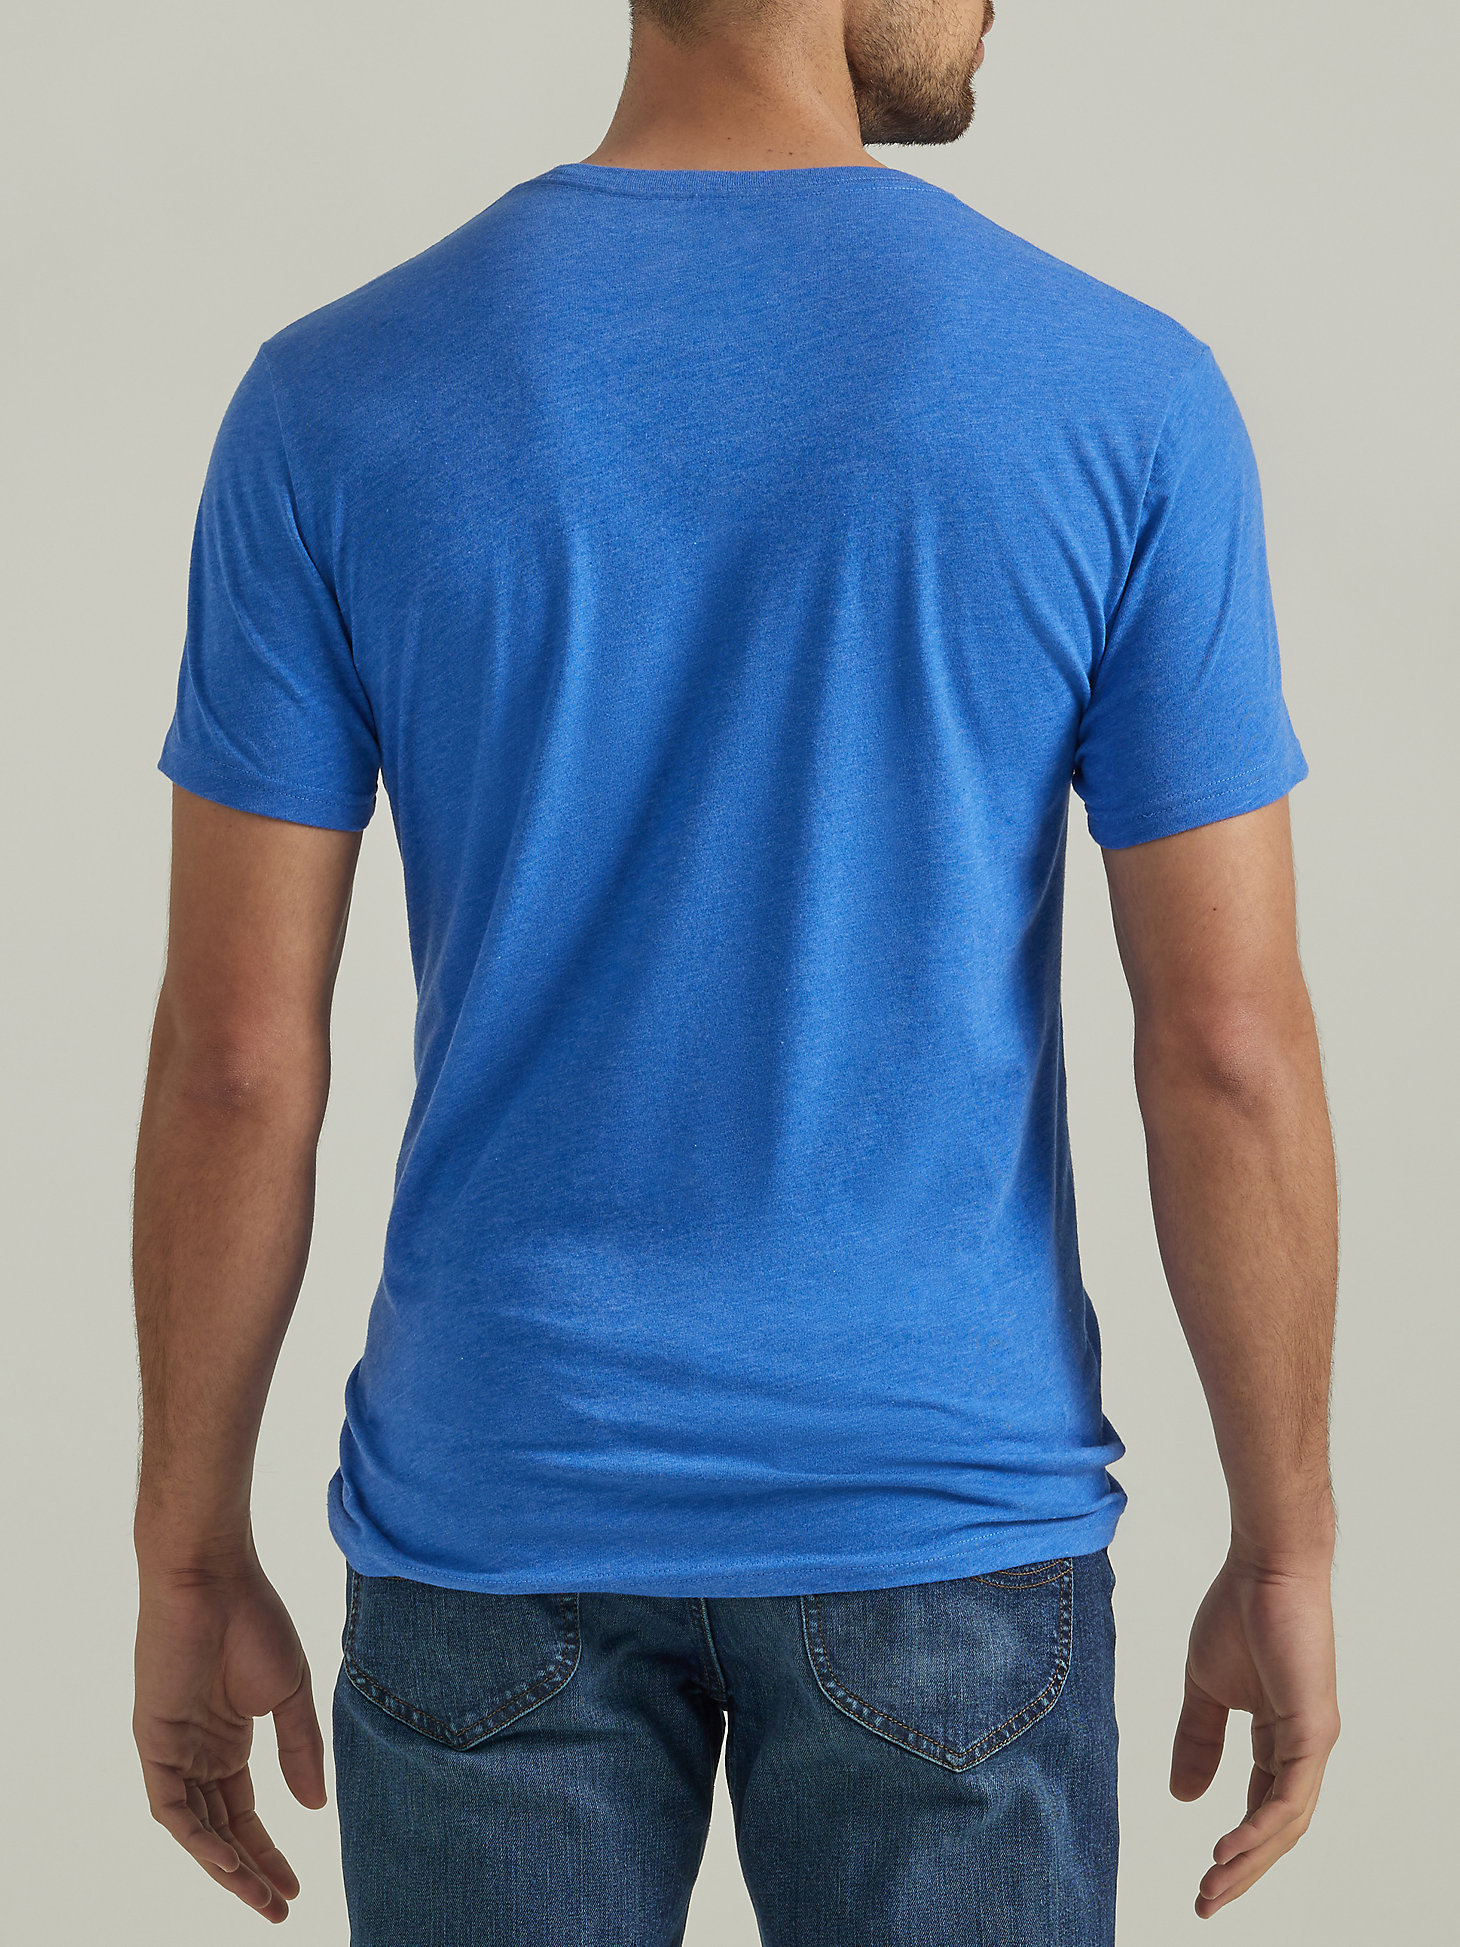 Men's Outdoor Lifestyle Graphic Tee in Beaucoup Blue alternative view 1